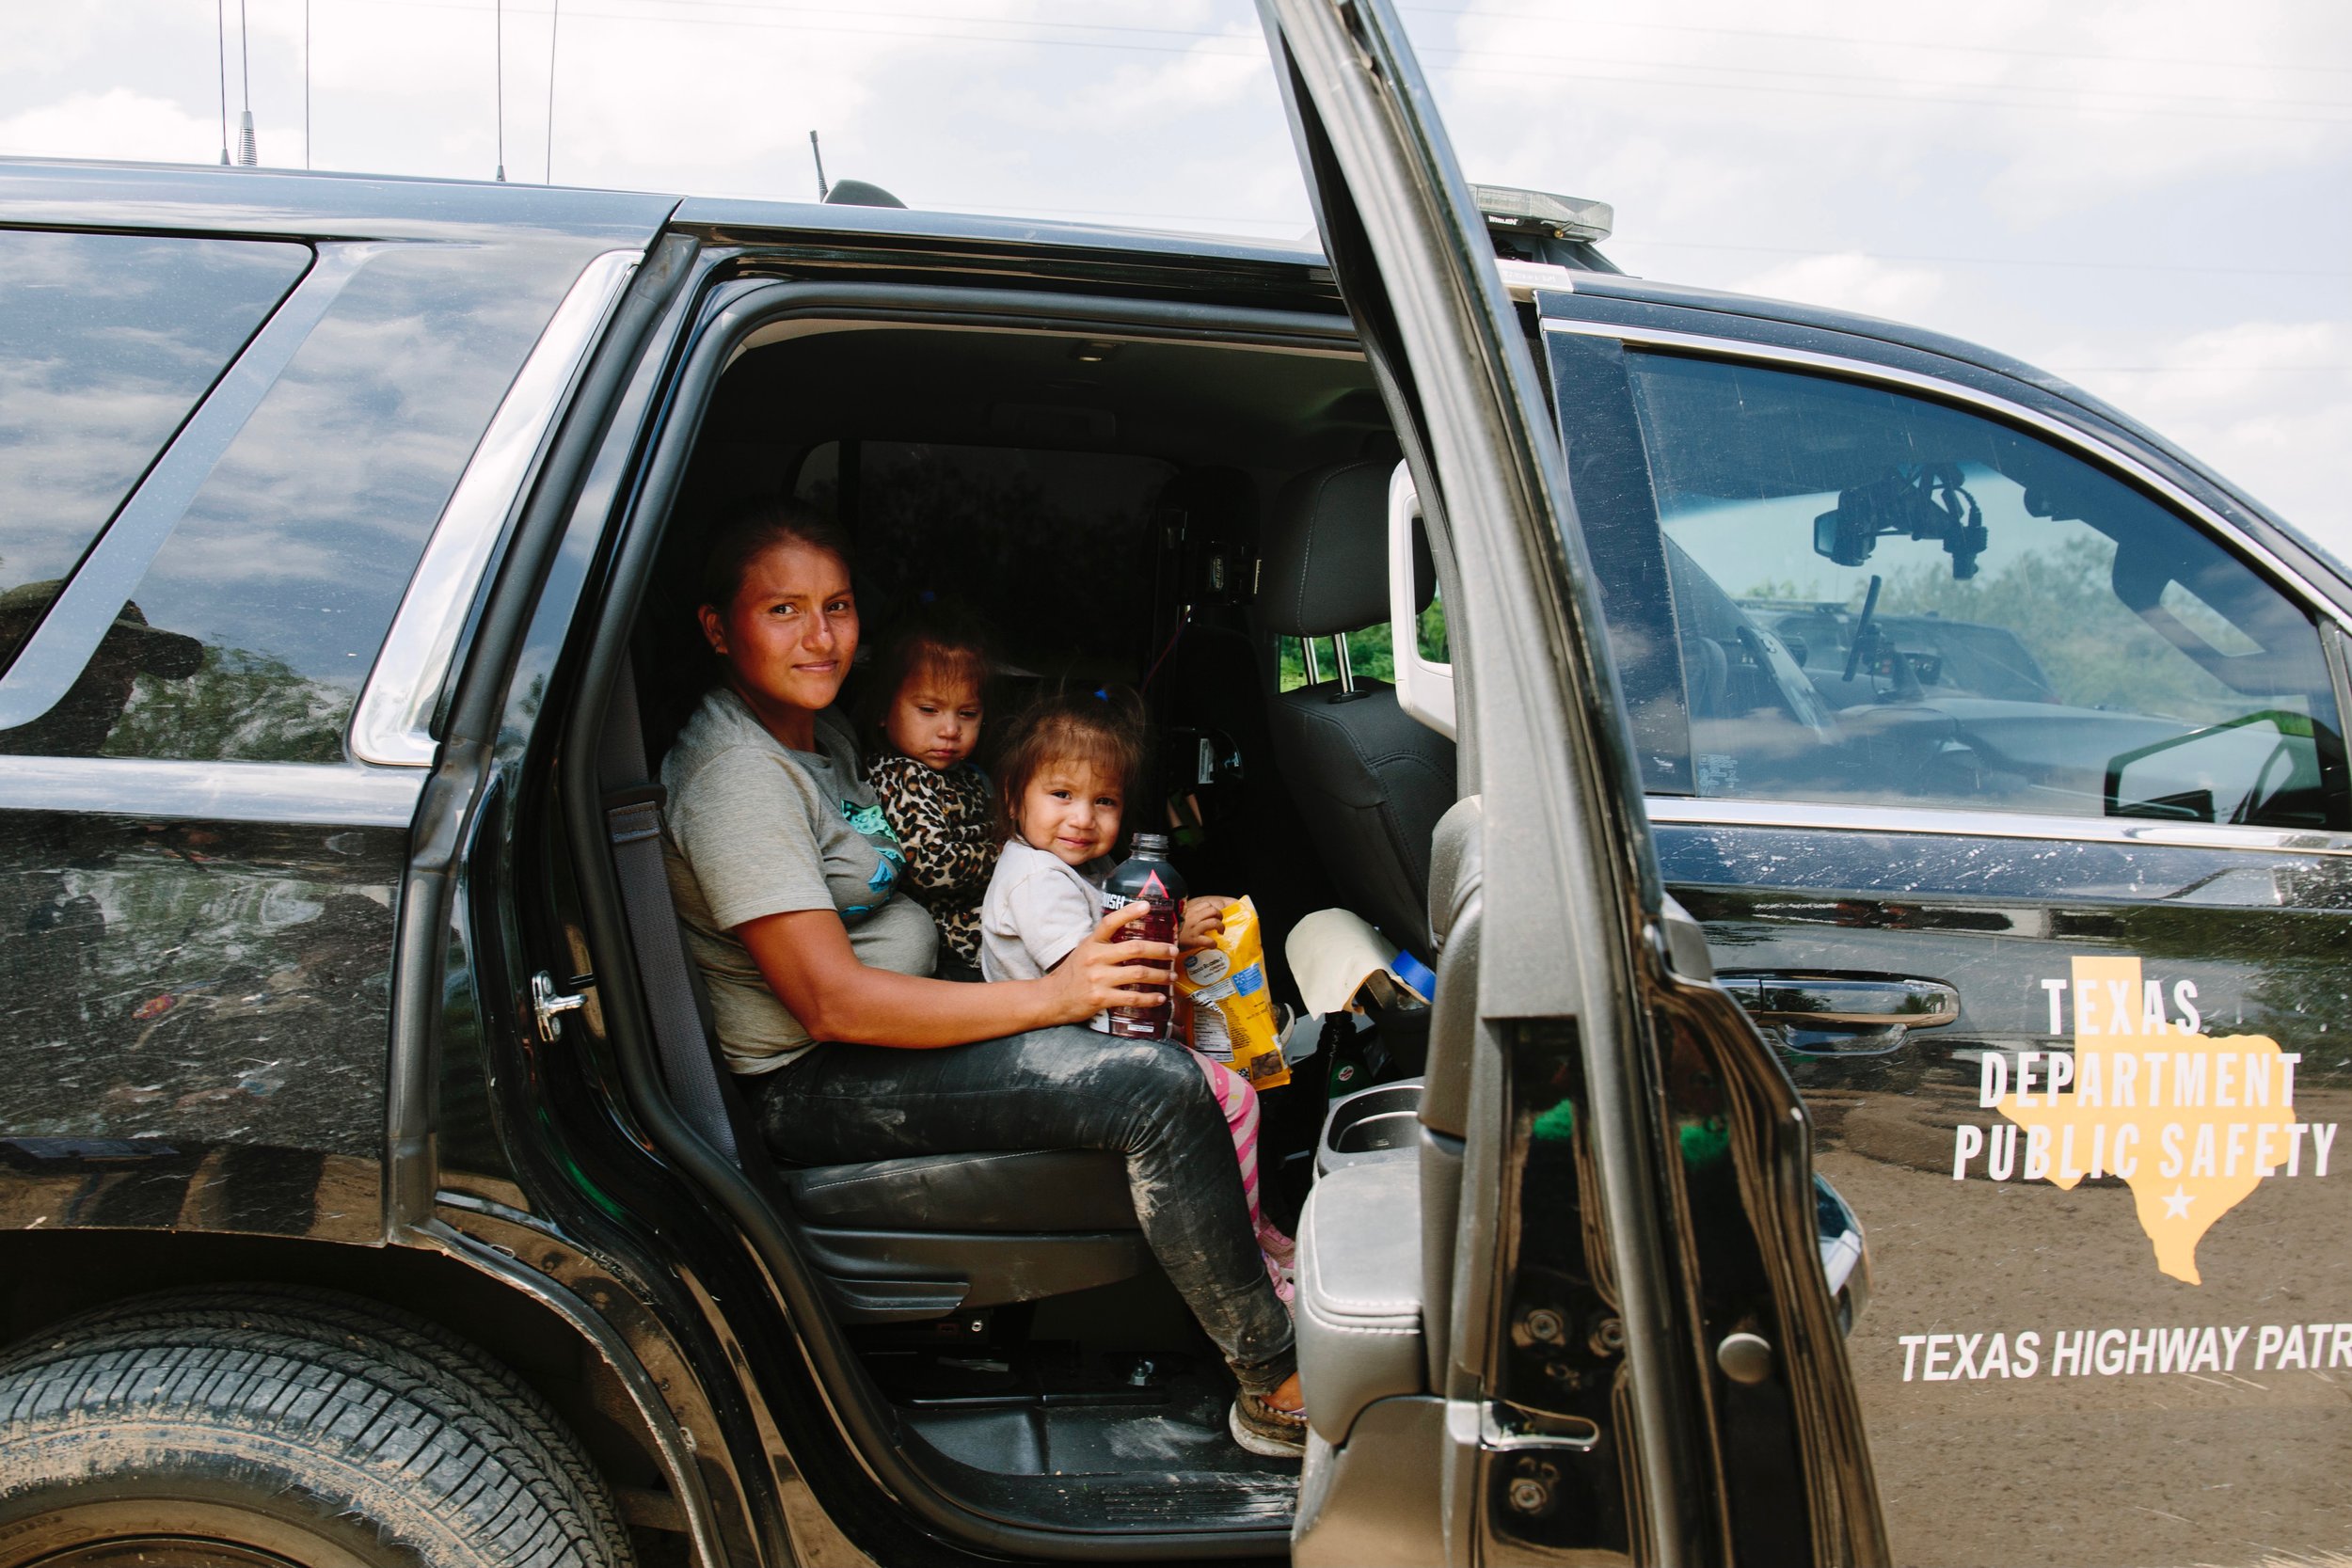  A mother with her twin girls cool off, in a Texas Highway Patrol vehicle, after crossing into the United States, from Mexico. La Joya, Texas. USA. June 2021. 